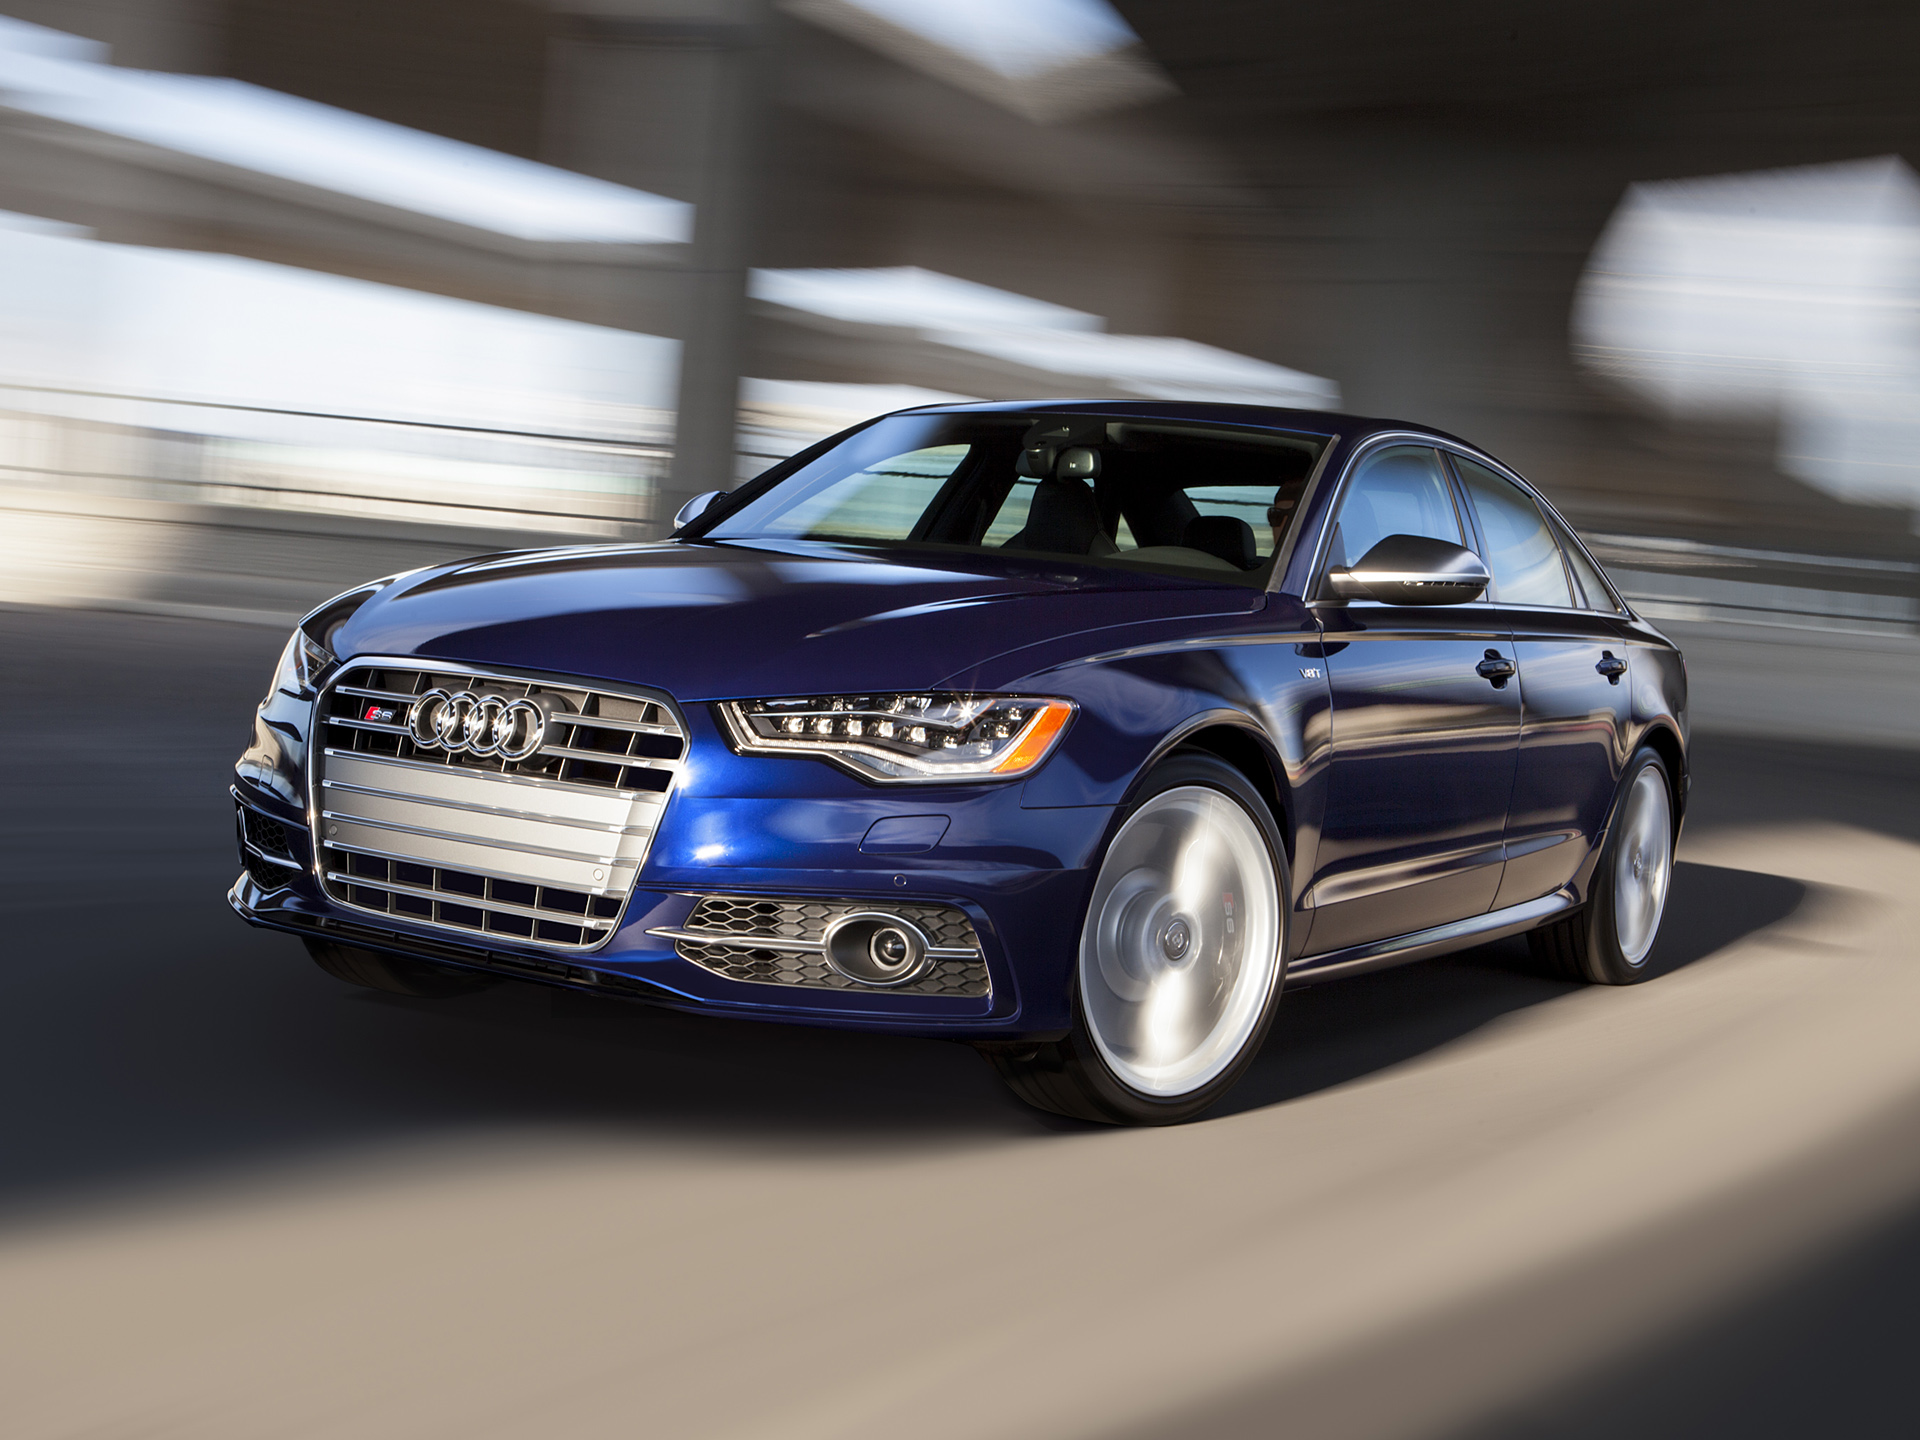 collection of best Audi S6 HD wallpaper